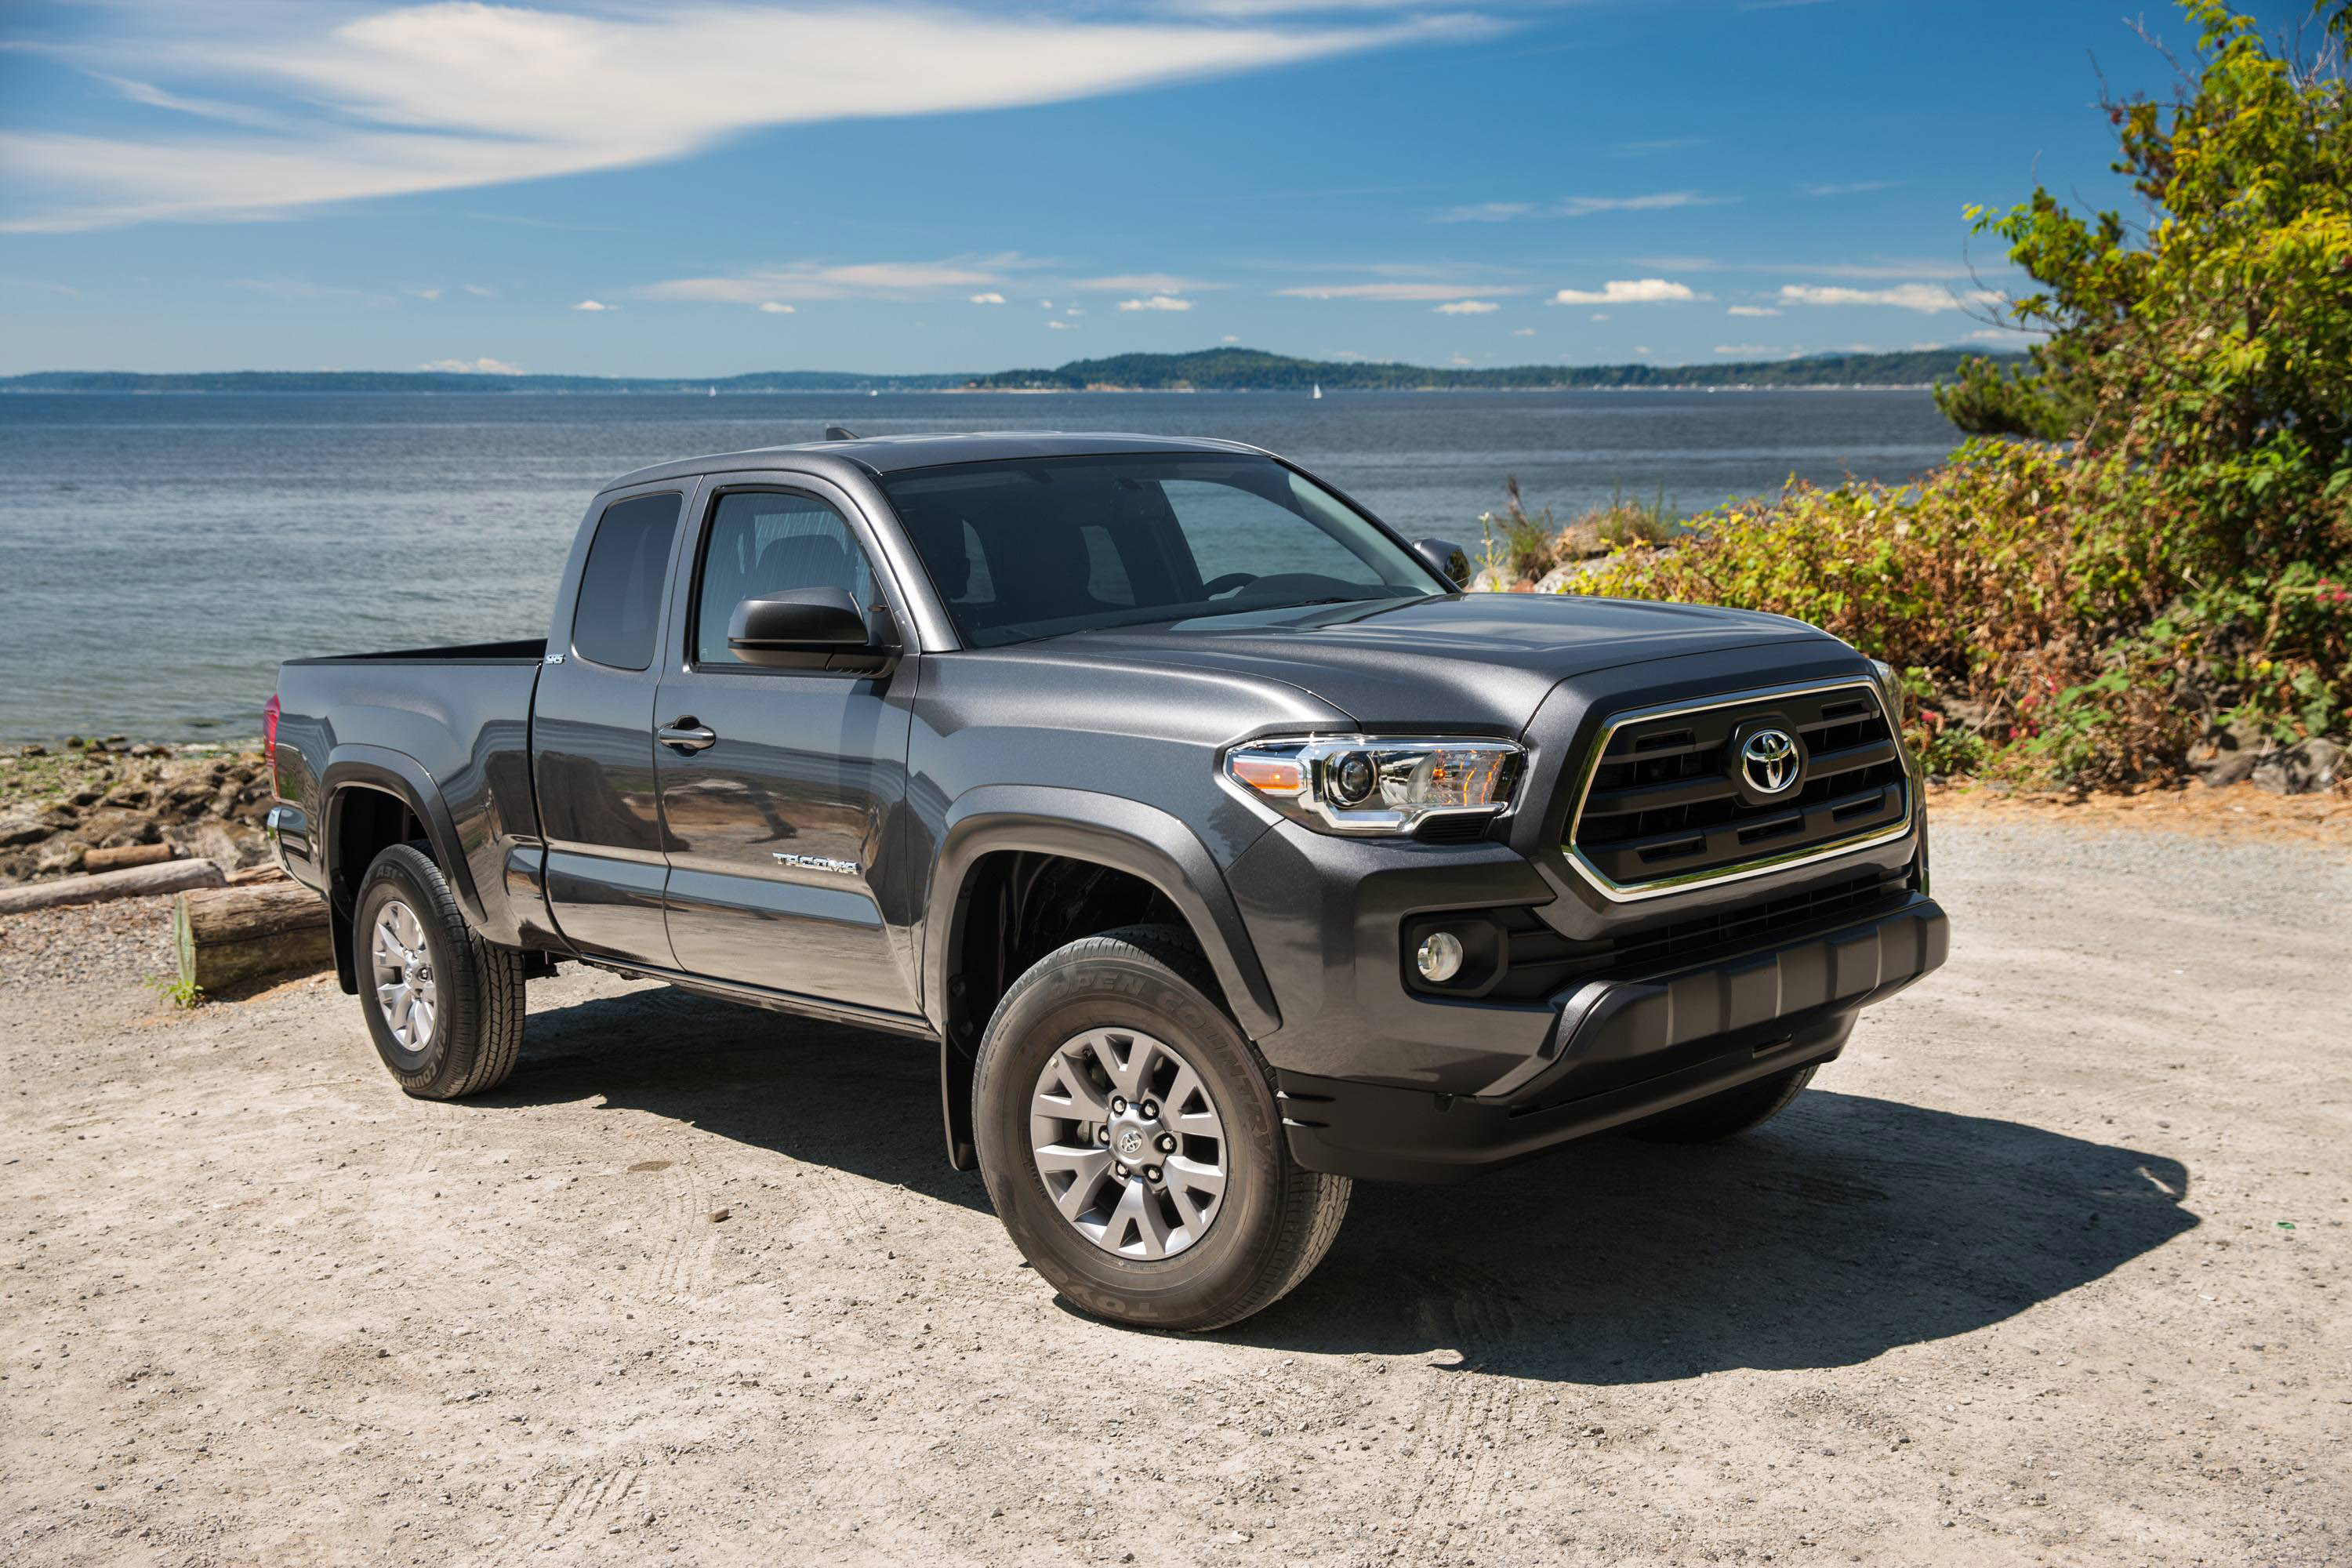 Have You Heard About 2016 Toyota Tacoma? It’s the Best Tacoma Ever!